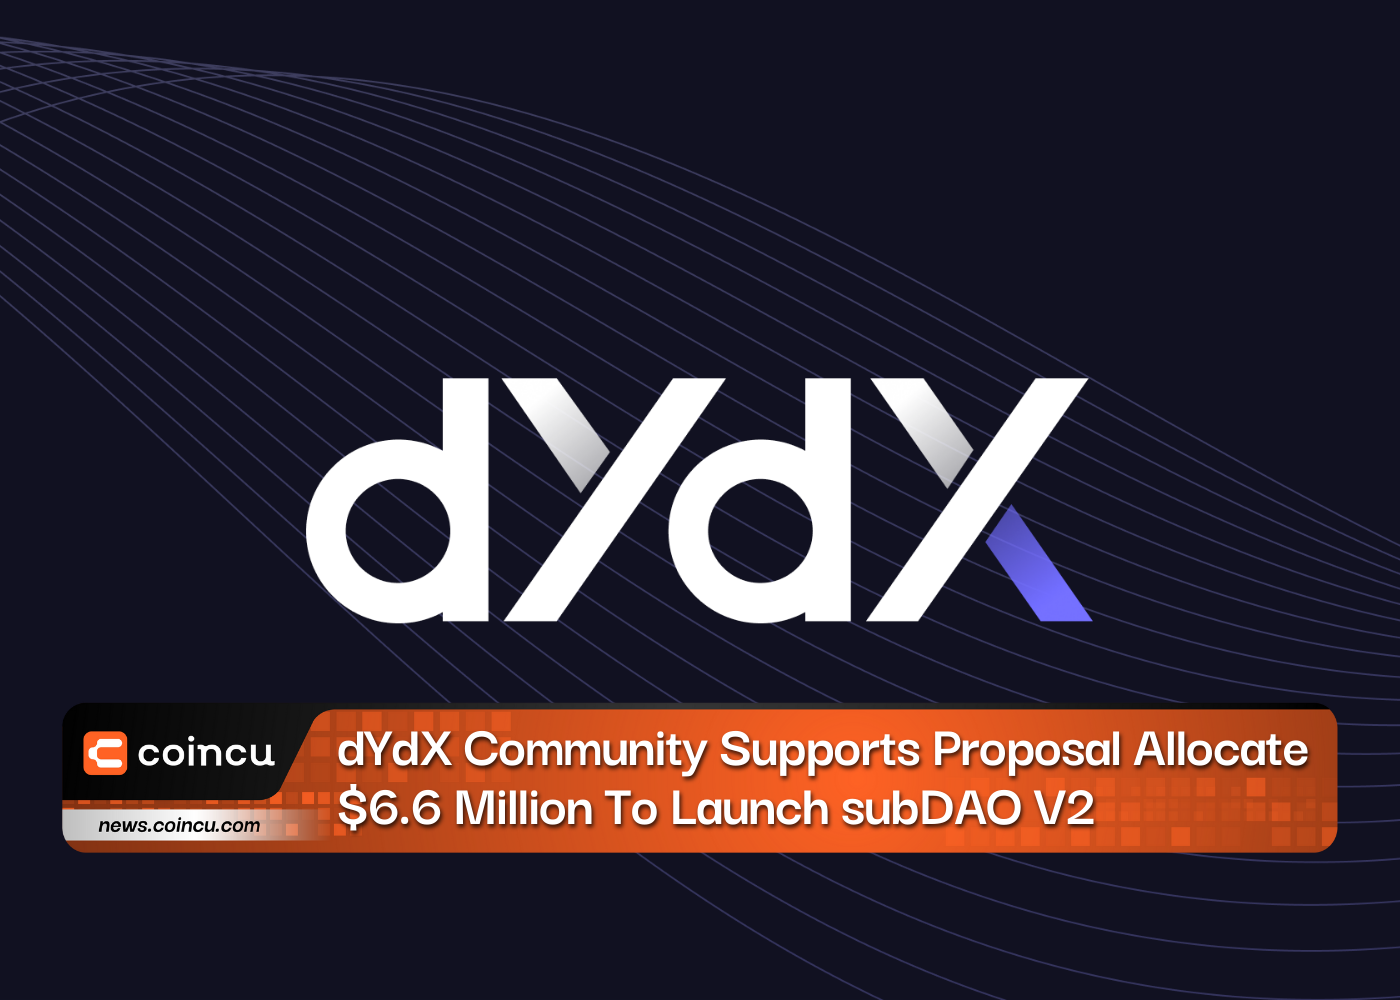 dYdX Community Supports Proposal Allocate $6.6 Million To Launch subDAO V2